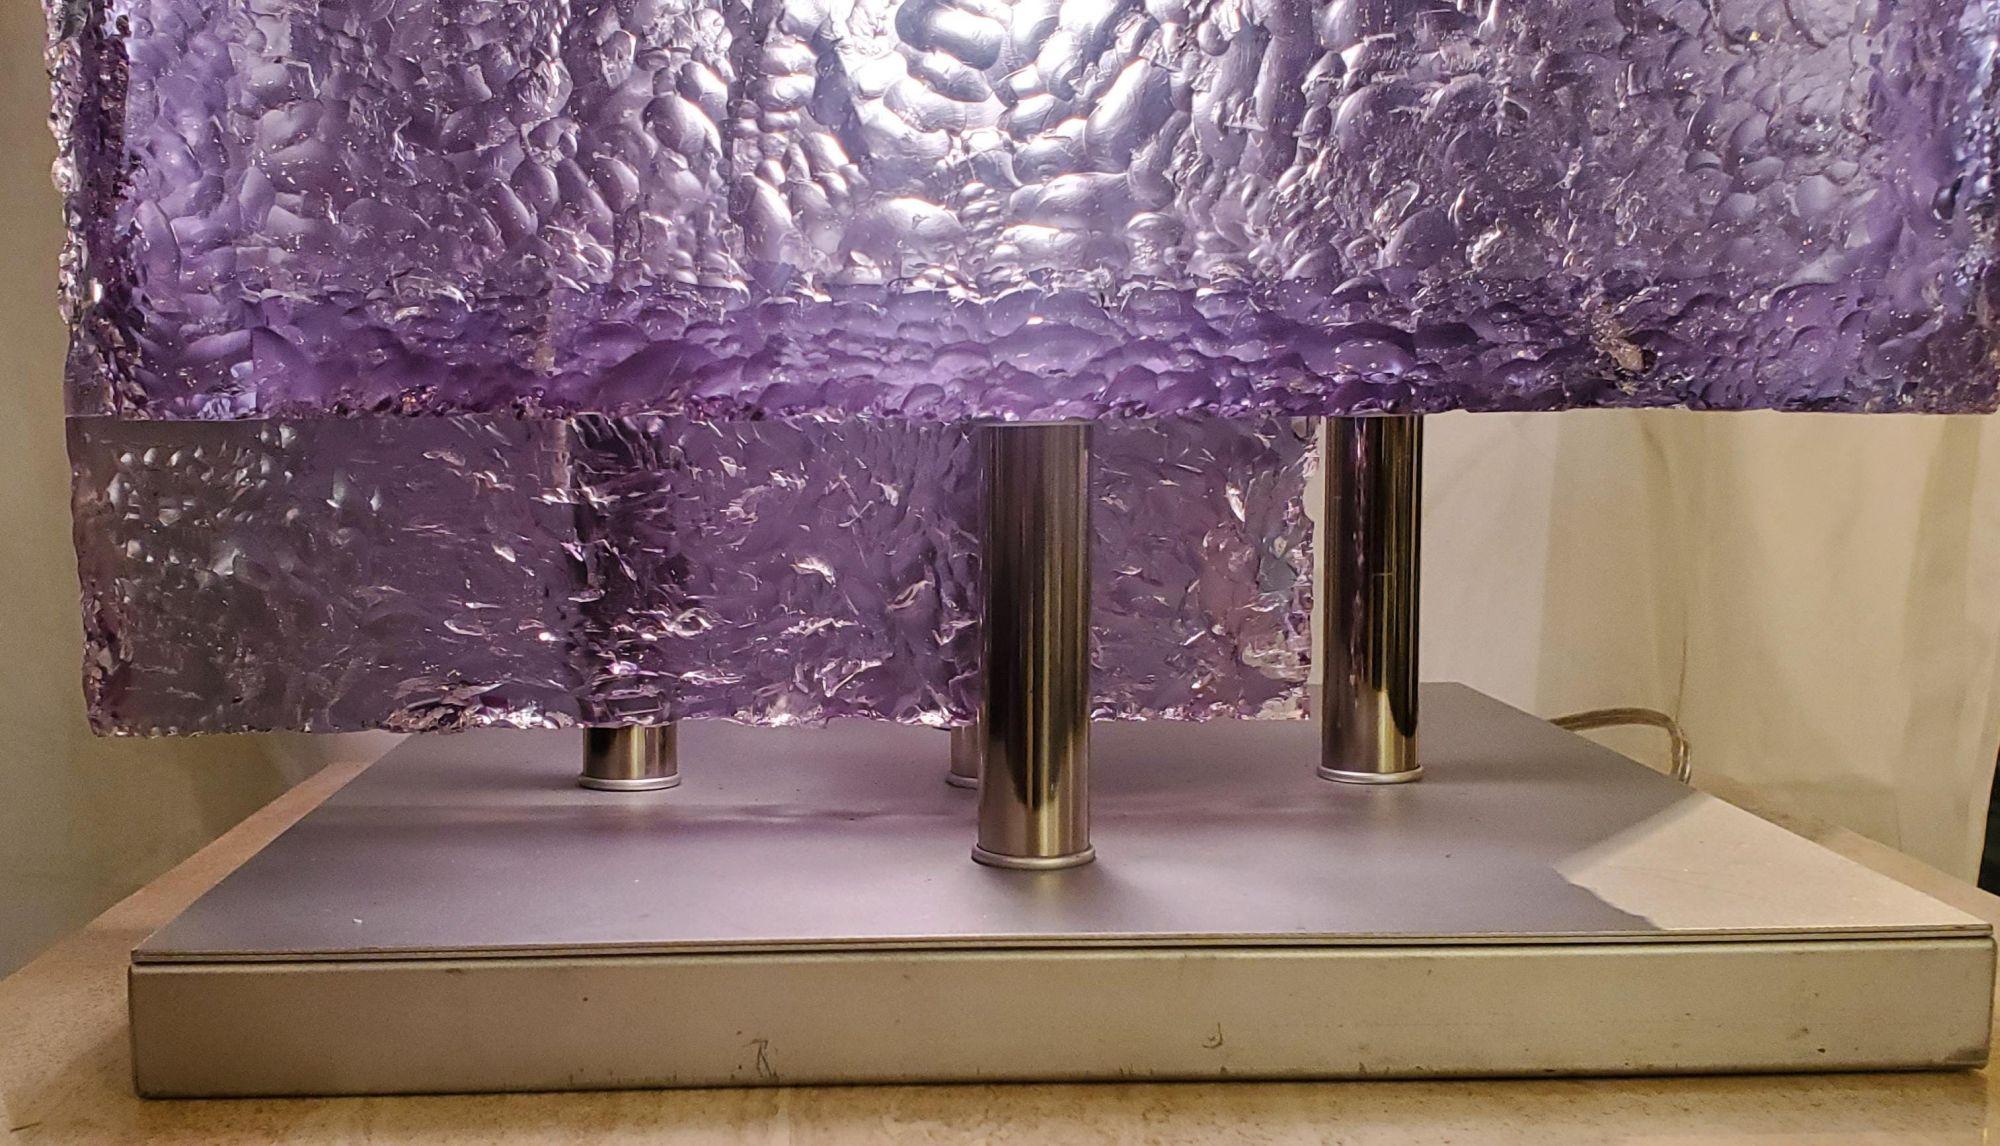 Post Modern Italian cubed iced lucite table Lamp. One side that is very well done, opens to show the interior lighting for an easy light bulb switch. The purple glow is due to the yellow lighting illuminating the lucite.
Other light sources in